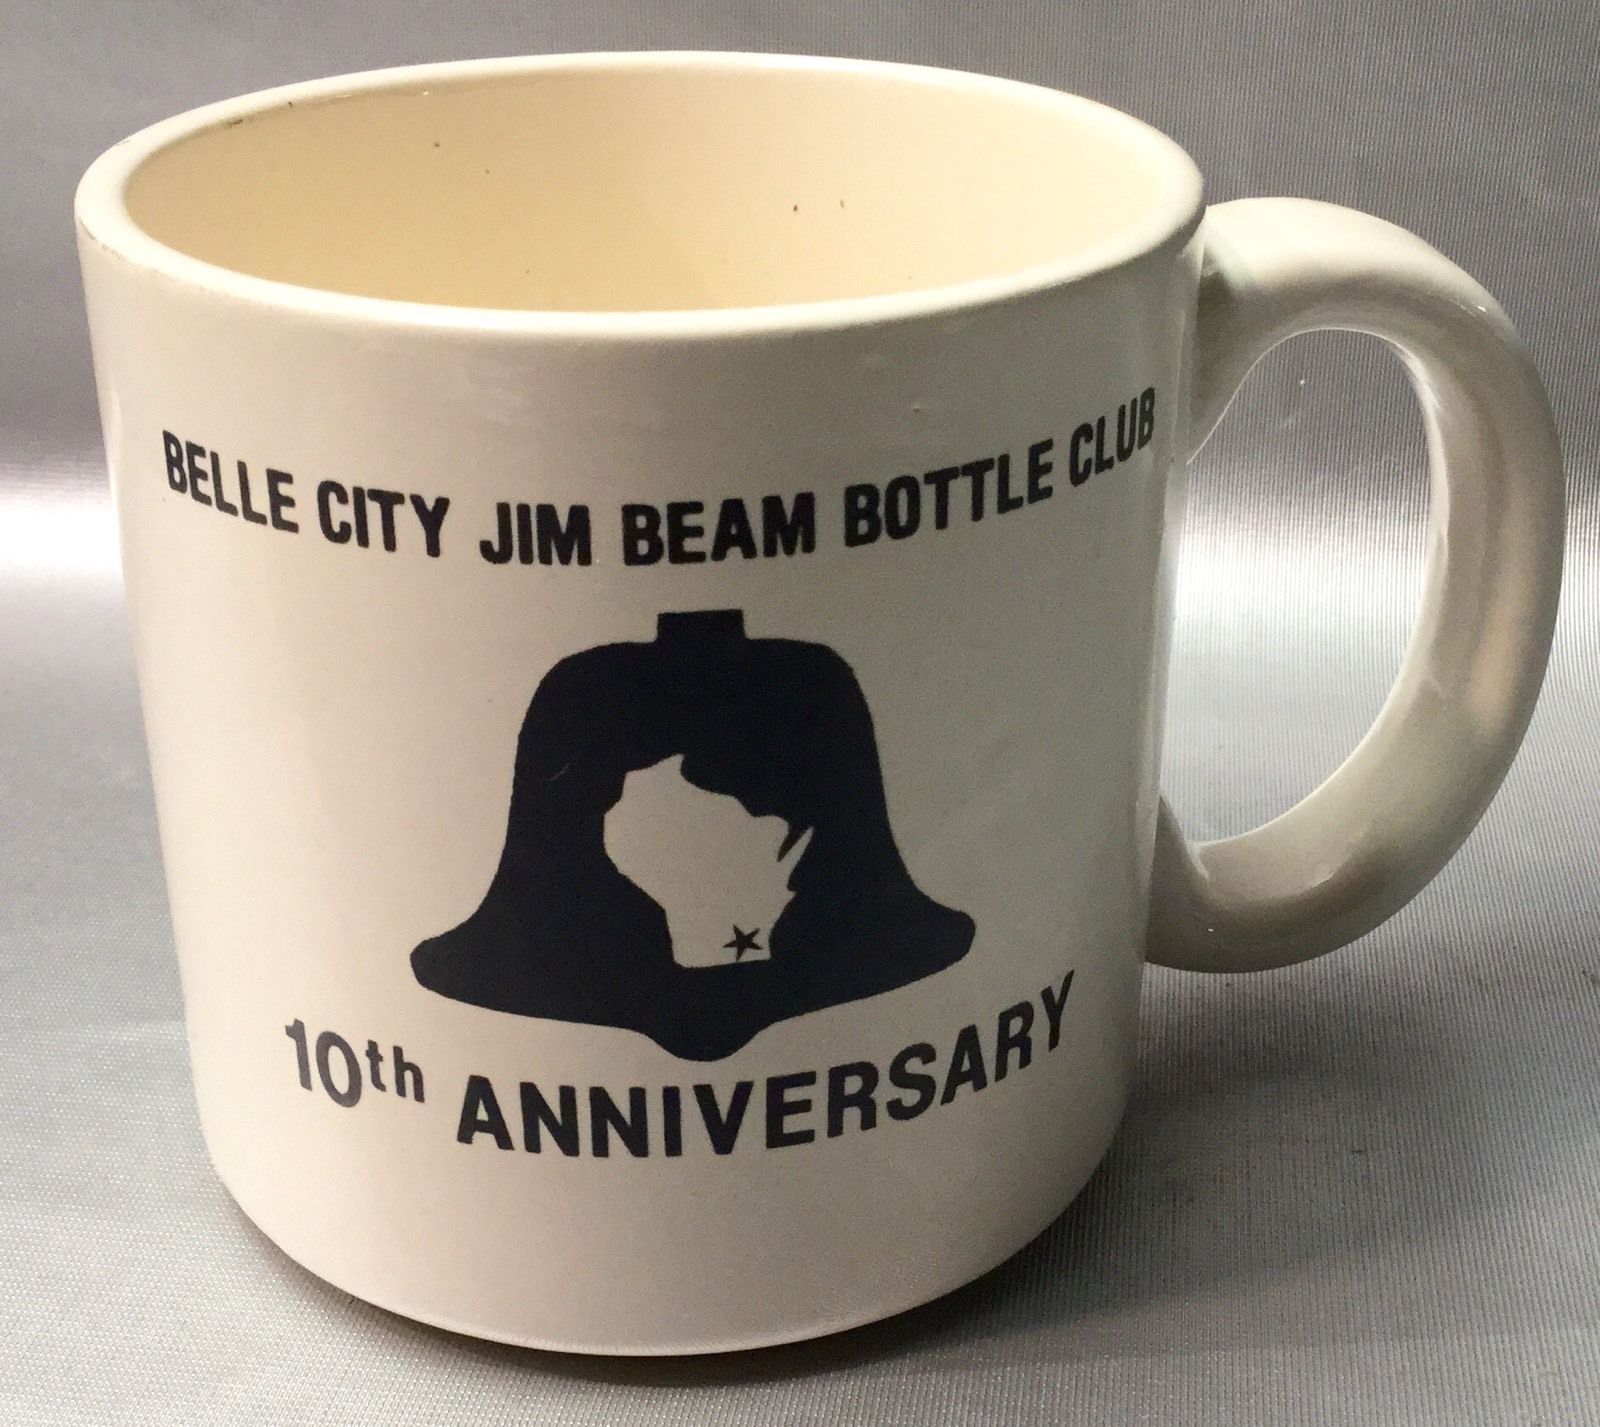 Primary image for Jim Beam Bottle Club BELLE CITY, WI 10th Anniversary Vintage 1987 Coffee Mug